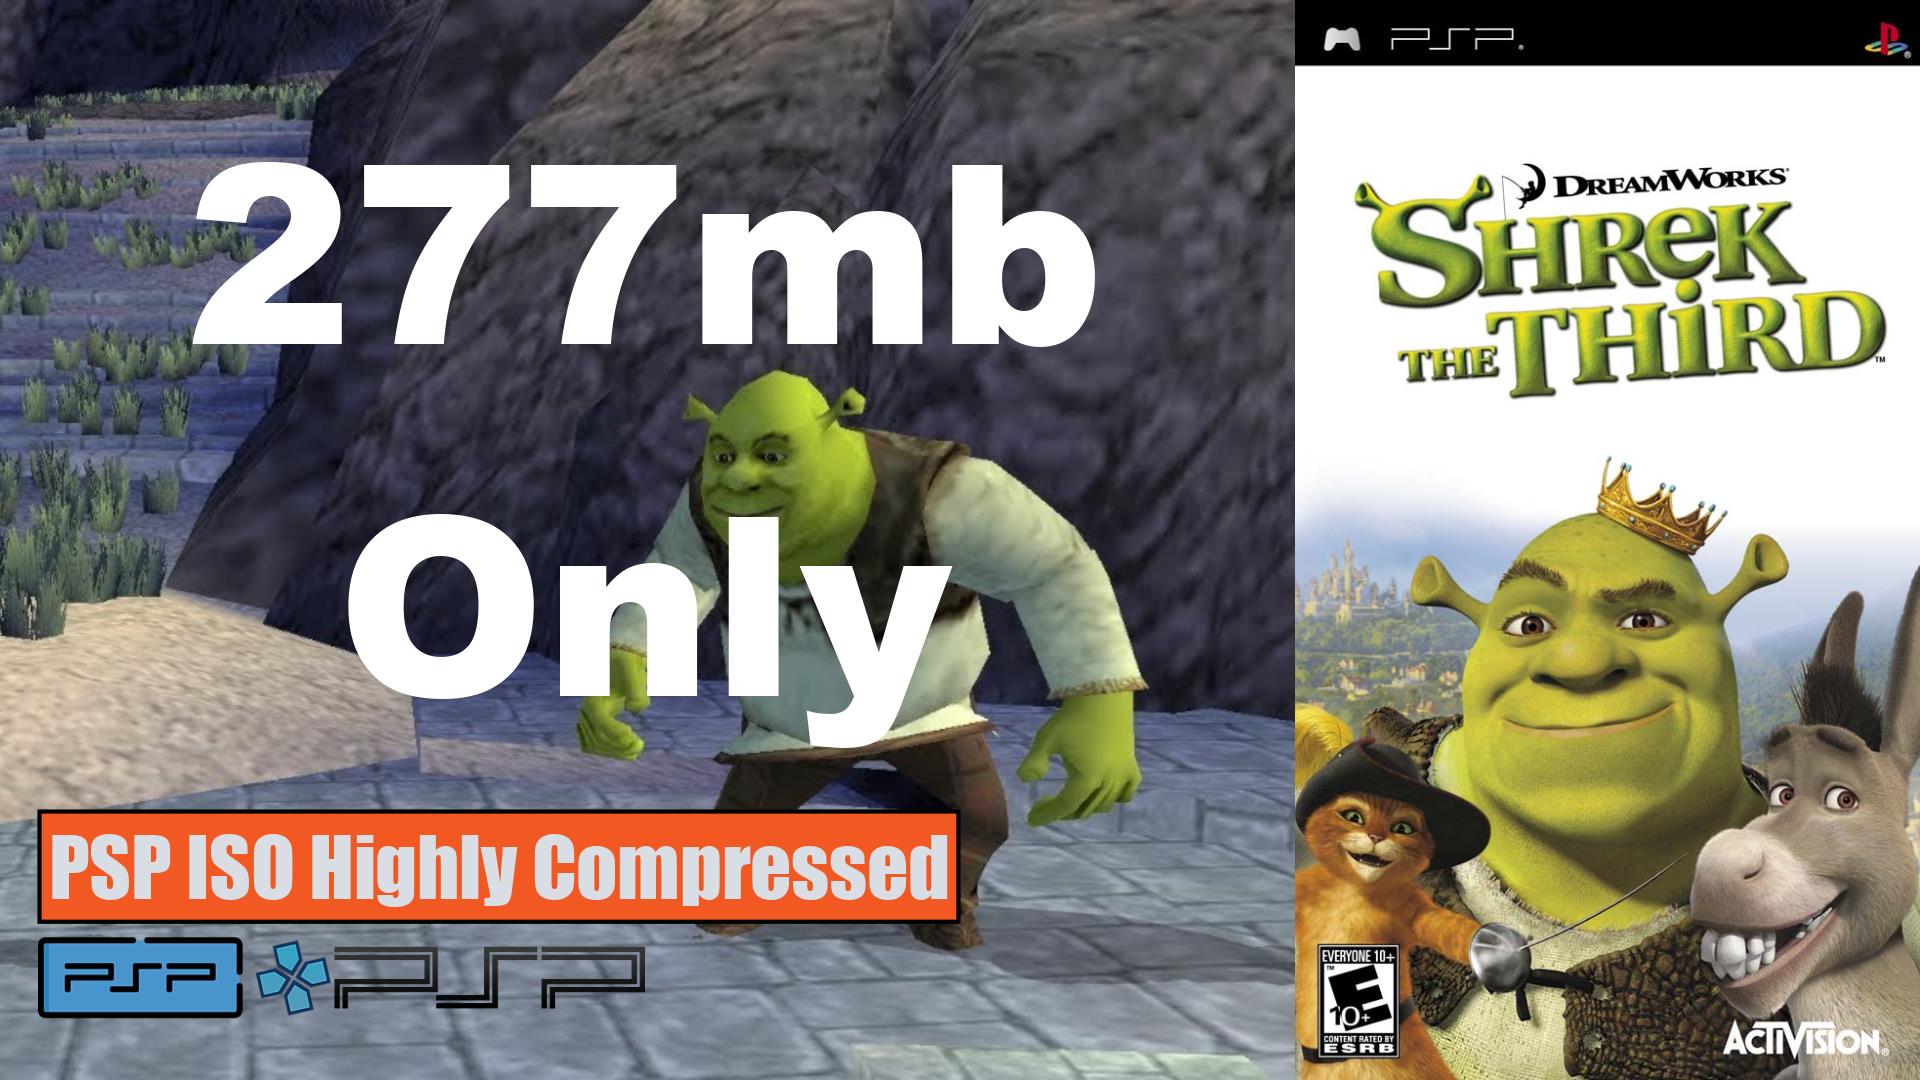 Shrek the Third PSP ISO Highly Compressed